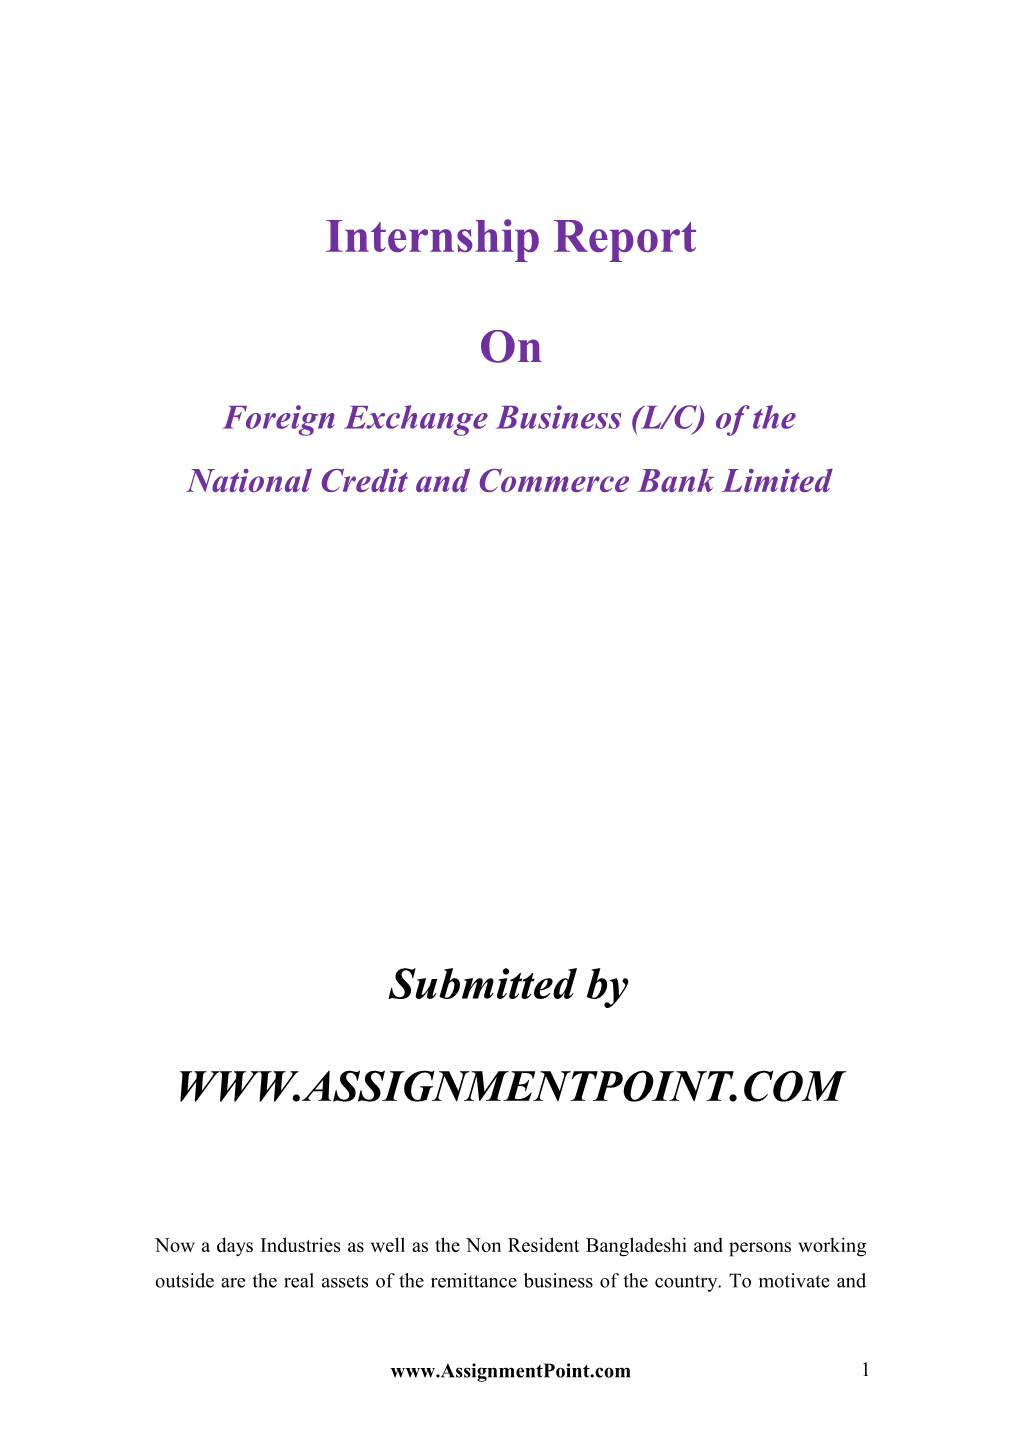 Foreign Exchange Business (L/C) of The